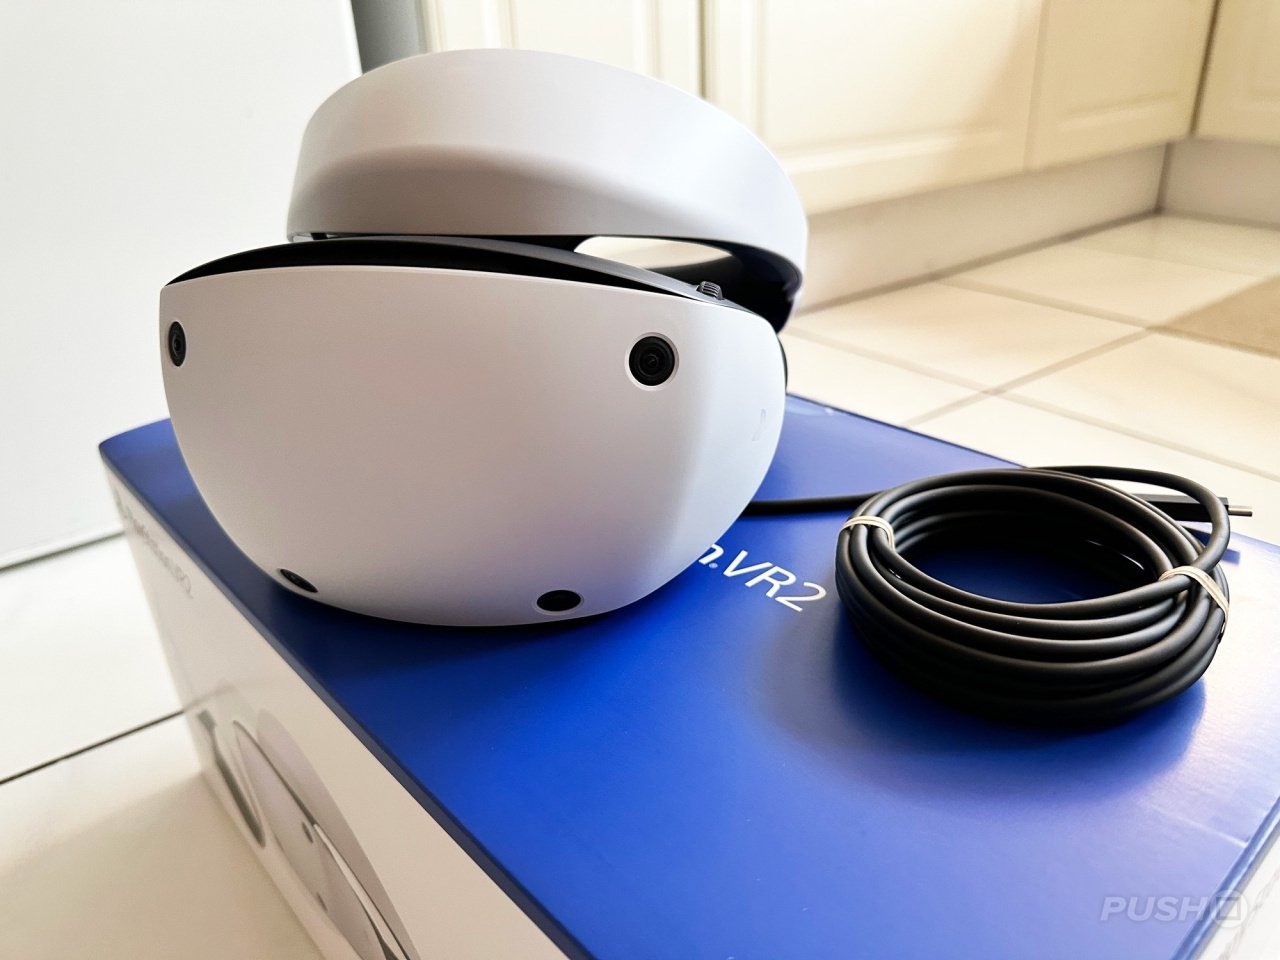 PSVR 2 Unboxing Video Shows Insights into the Features of the Headset